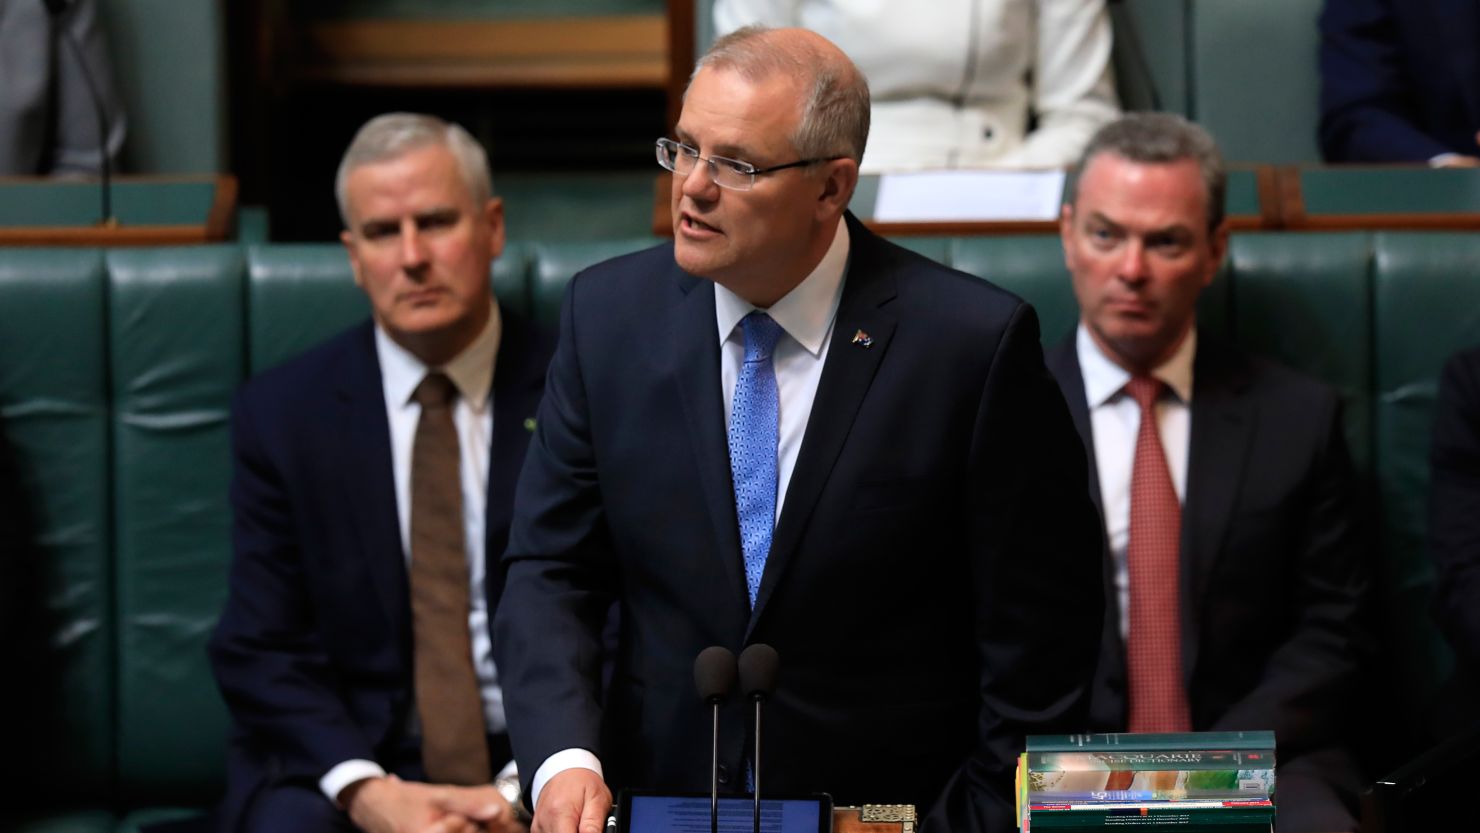 Australia's Prime Minister Scott Morrison (C) delivers a national apology to child sex abuse victims in Canberra on October 22.